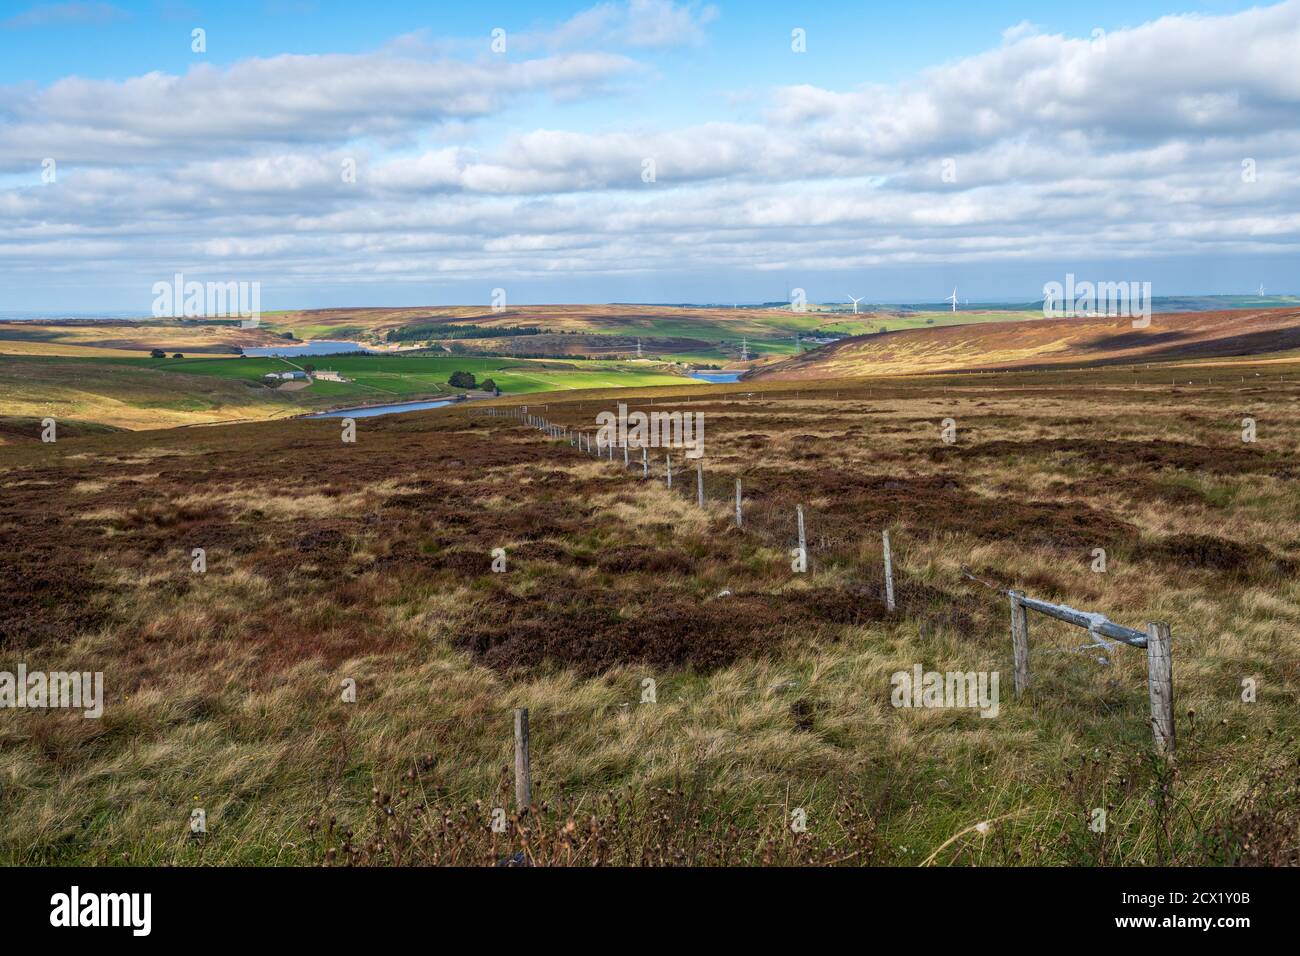 View from the A628 Woodhead Pass road across the moors to Dunford Bridge and Winscar Reservoir, South Yorkshire, UK Stock Photo